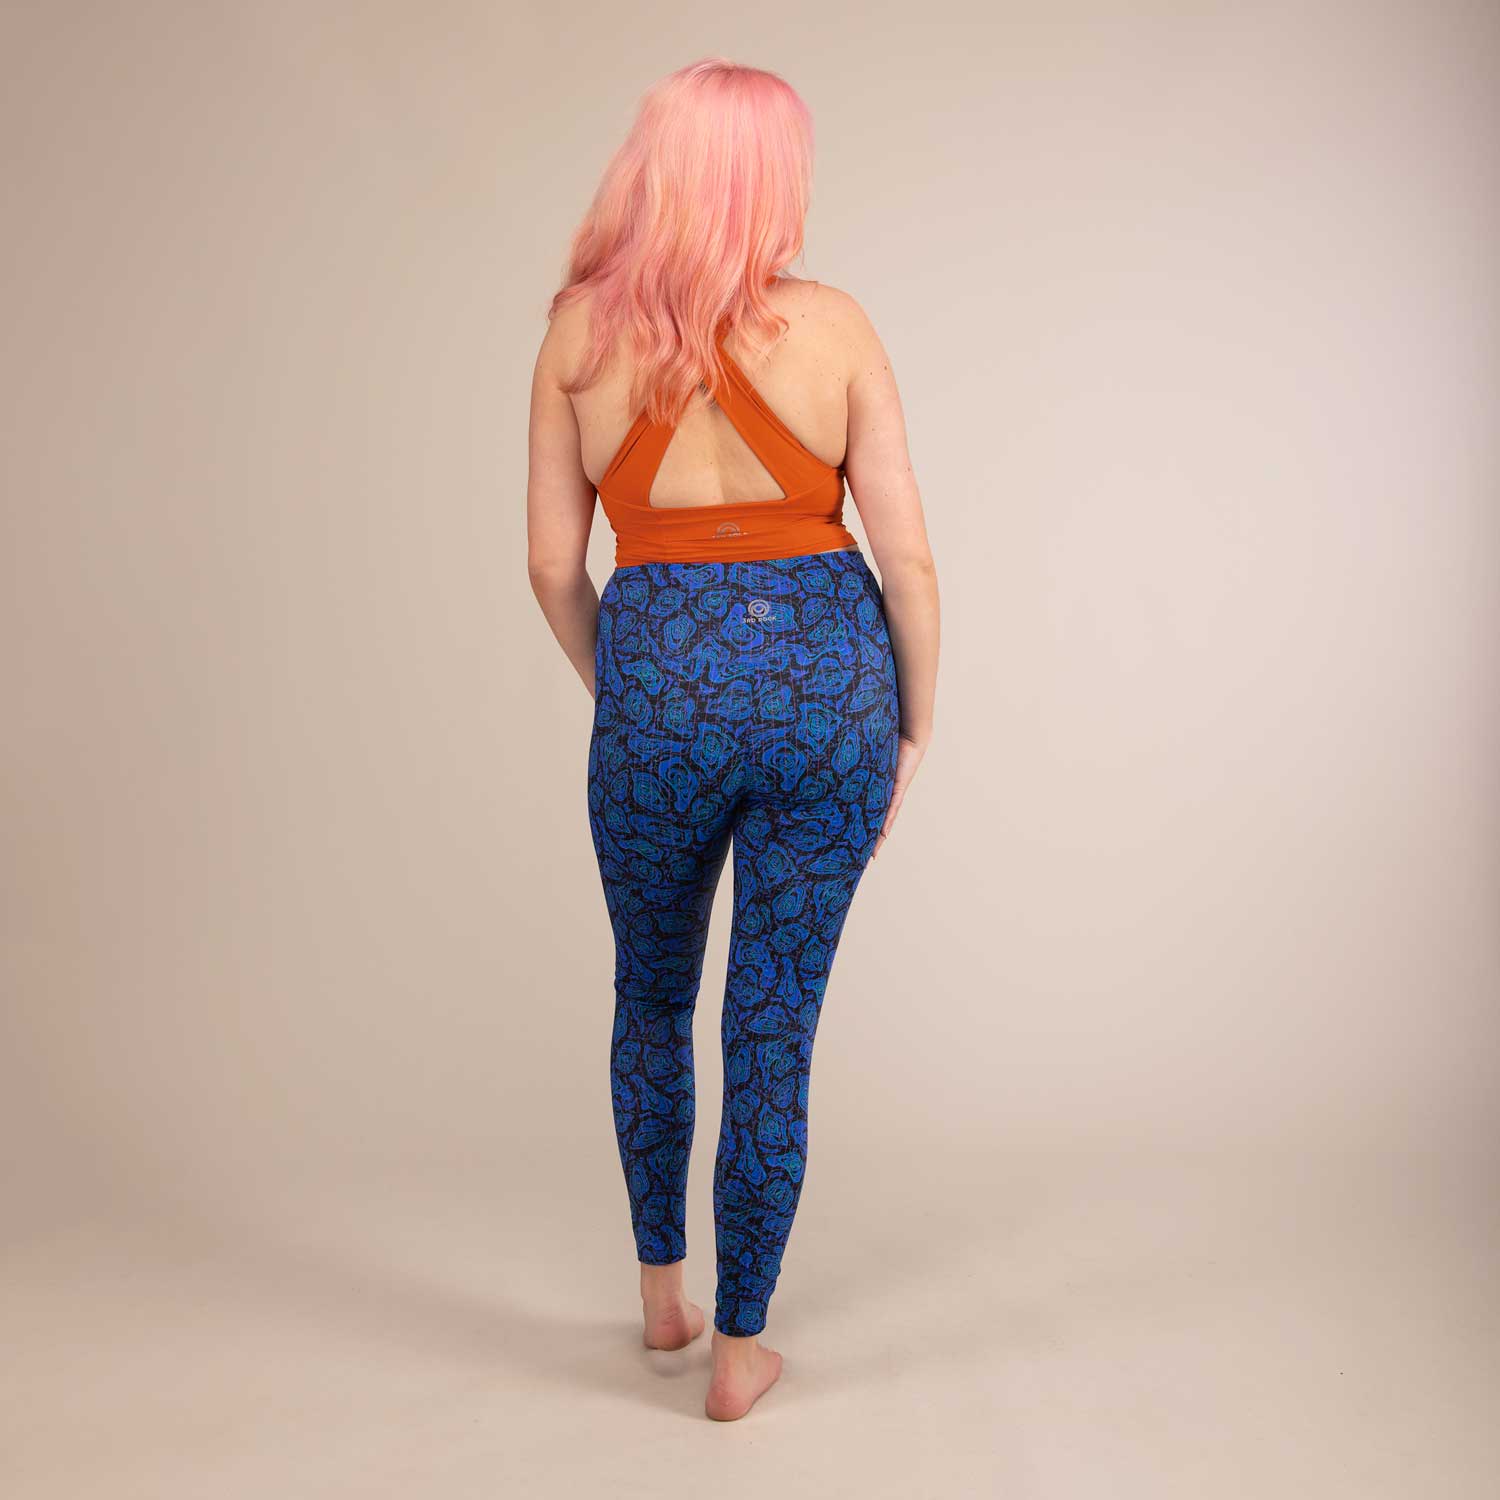 TITAN GEO JAGUAR LEGGINGS | Printed Recycled Leggings | 3RD ROCK Clothing -  Sophie is 5ft 9 with a 34" waist, 42" hips and wears a size 16 F